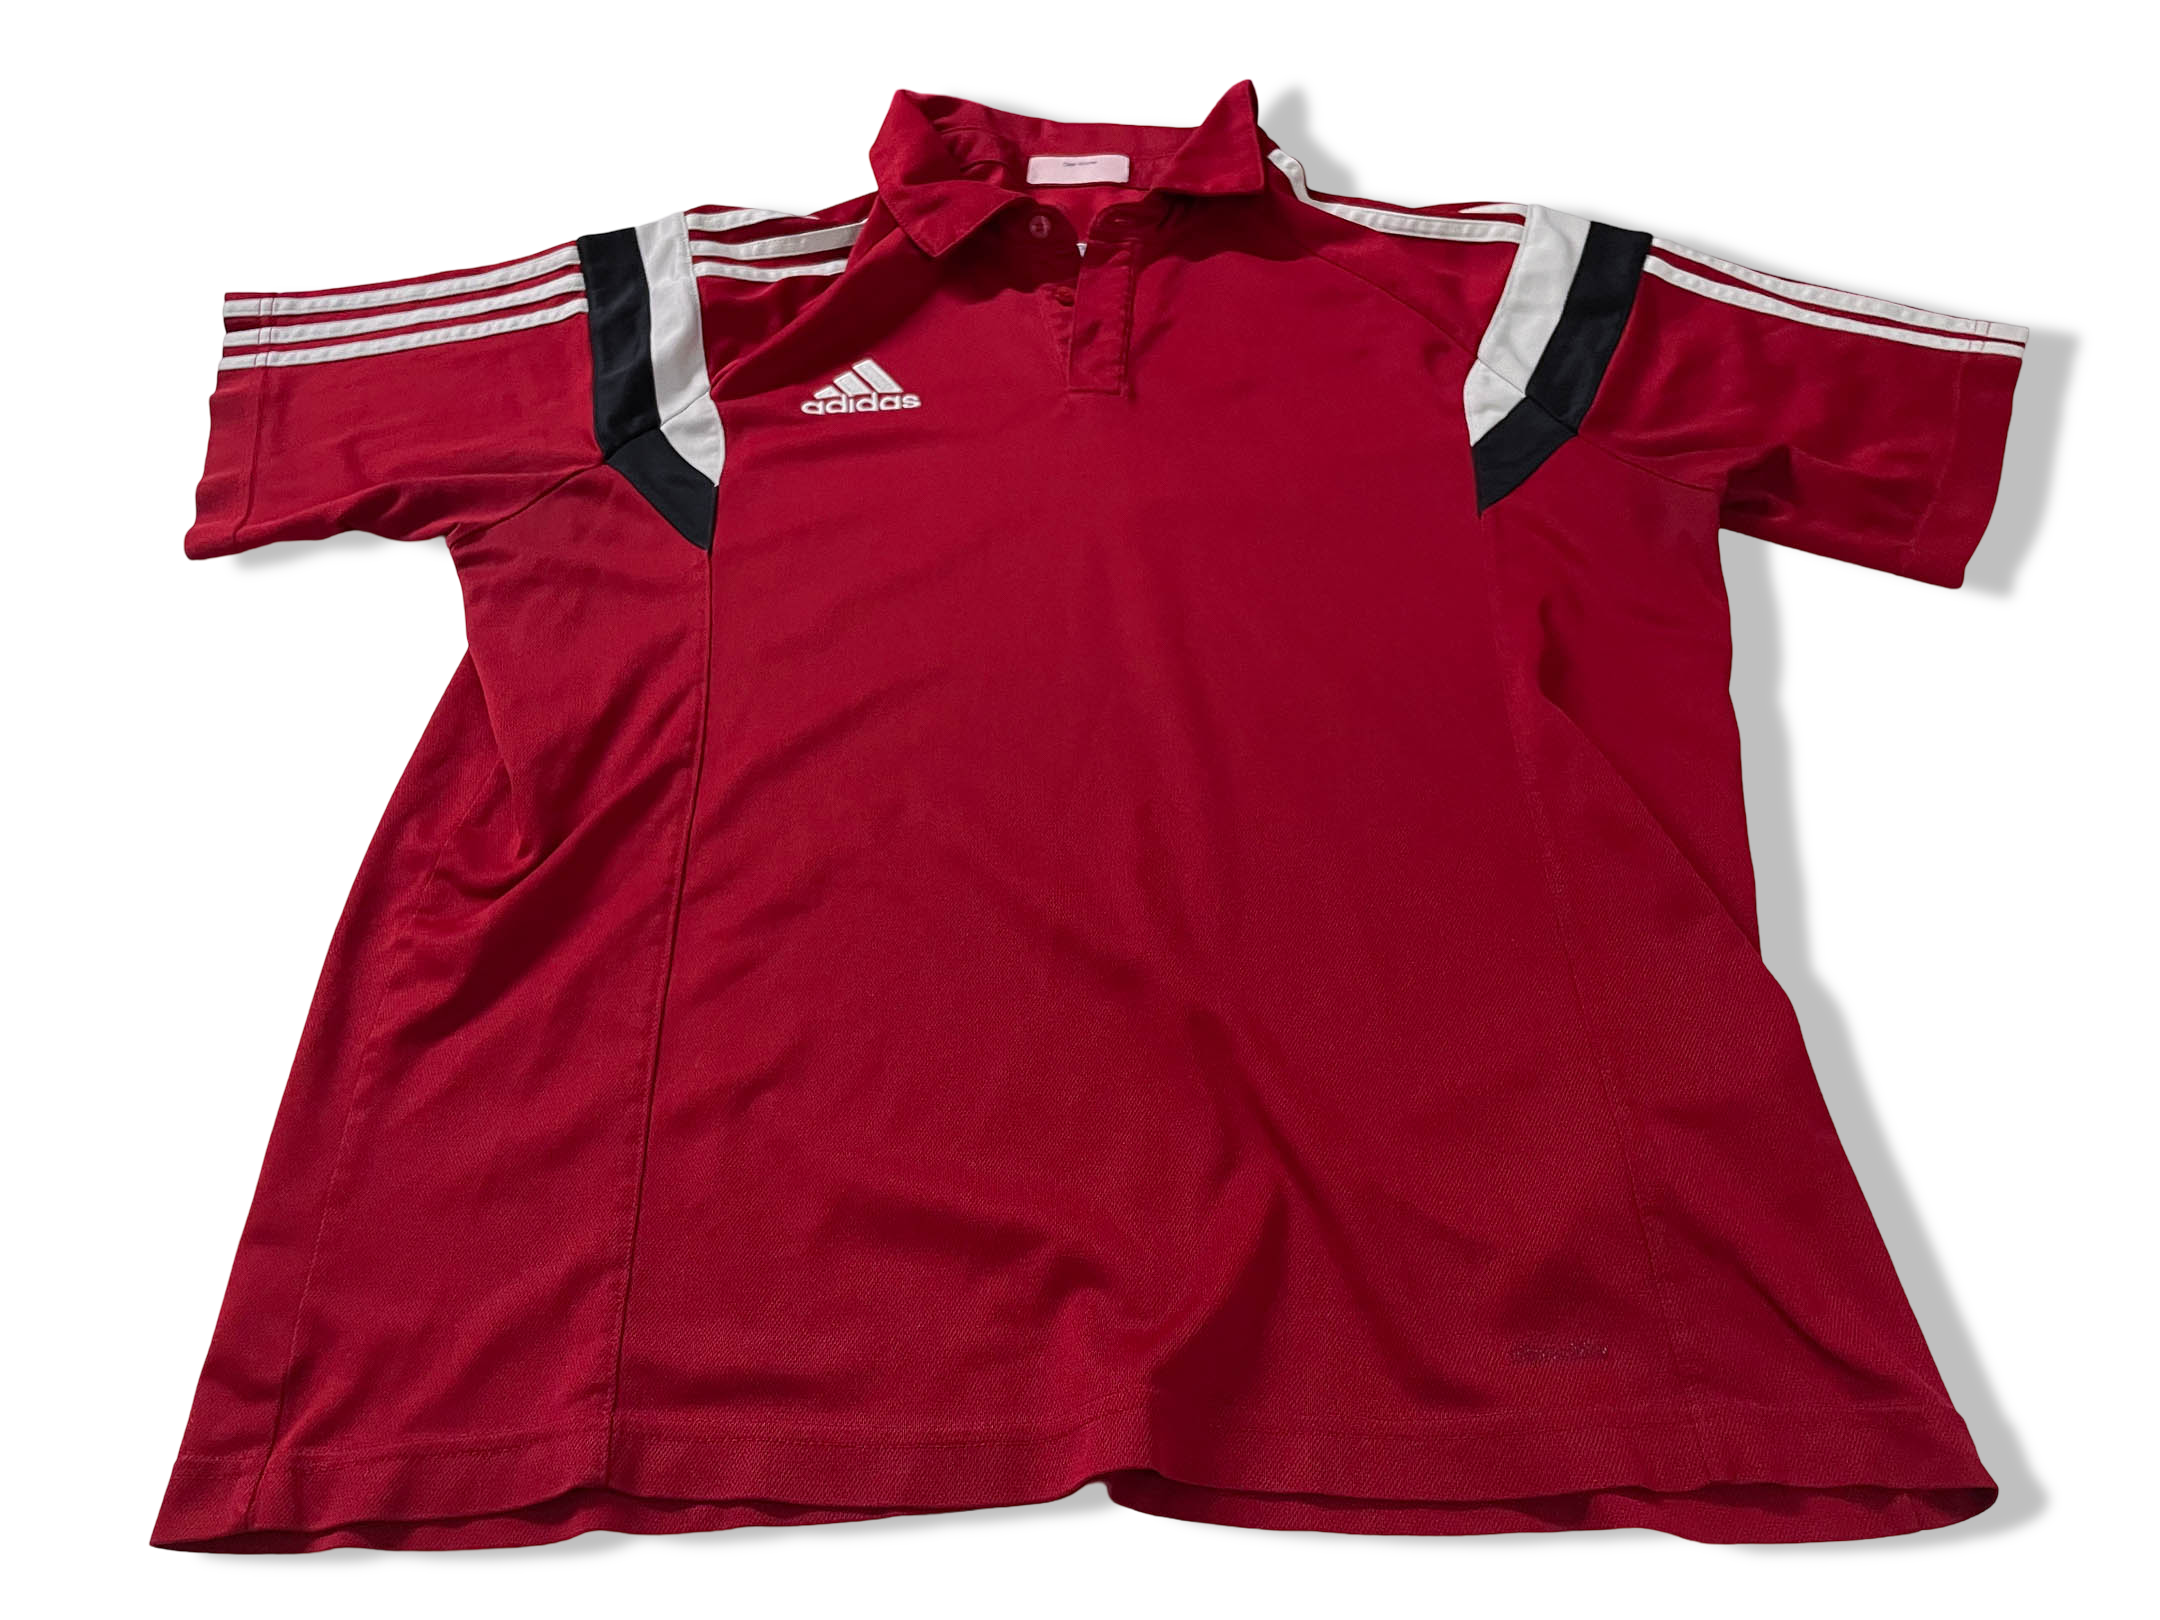 Vintage Adidas Men's polo shirt Condivo red in M|L29 W20|SKU 4137